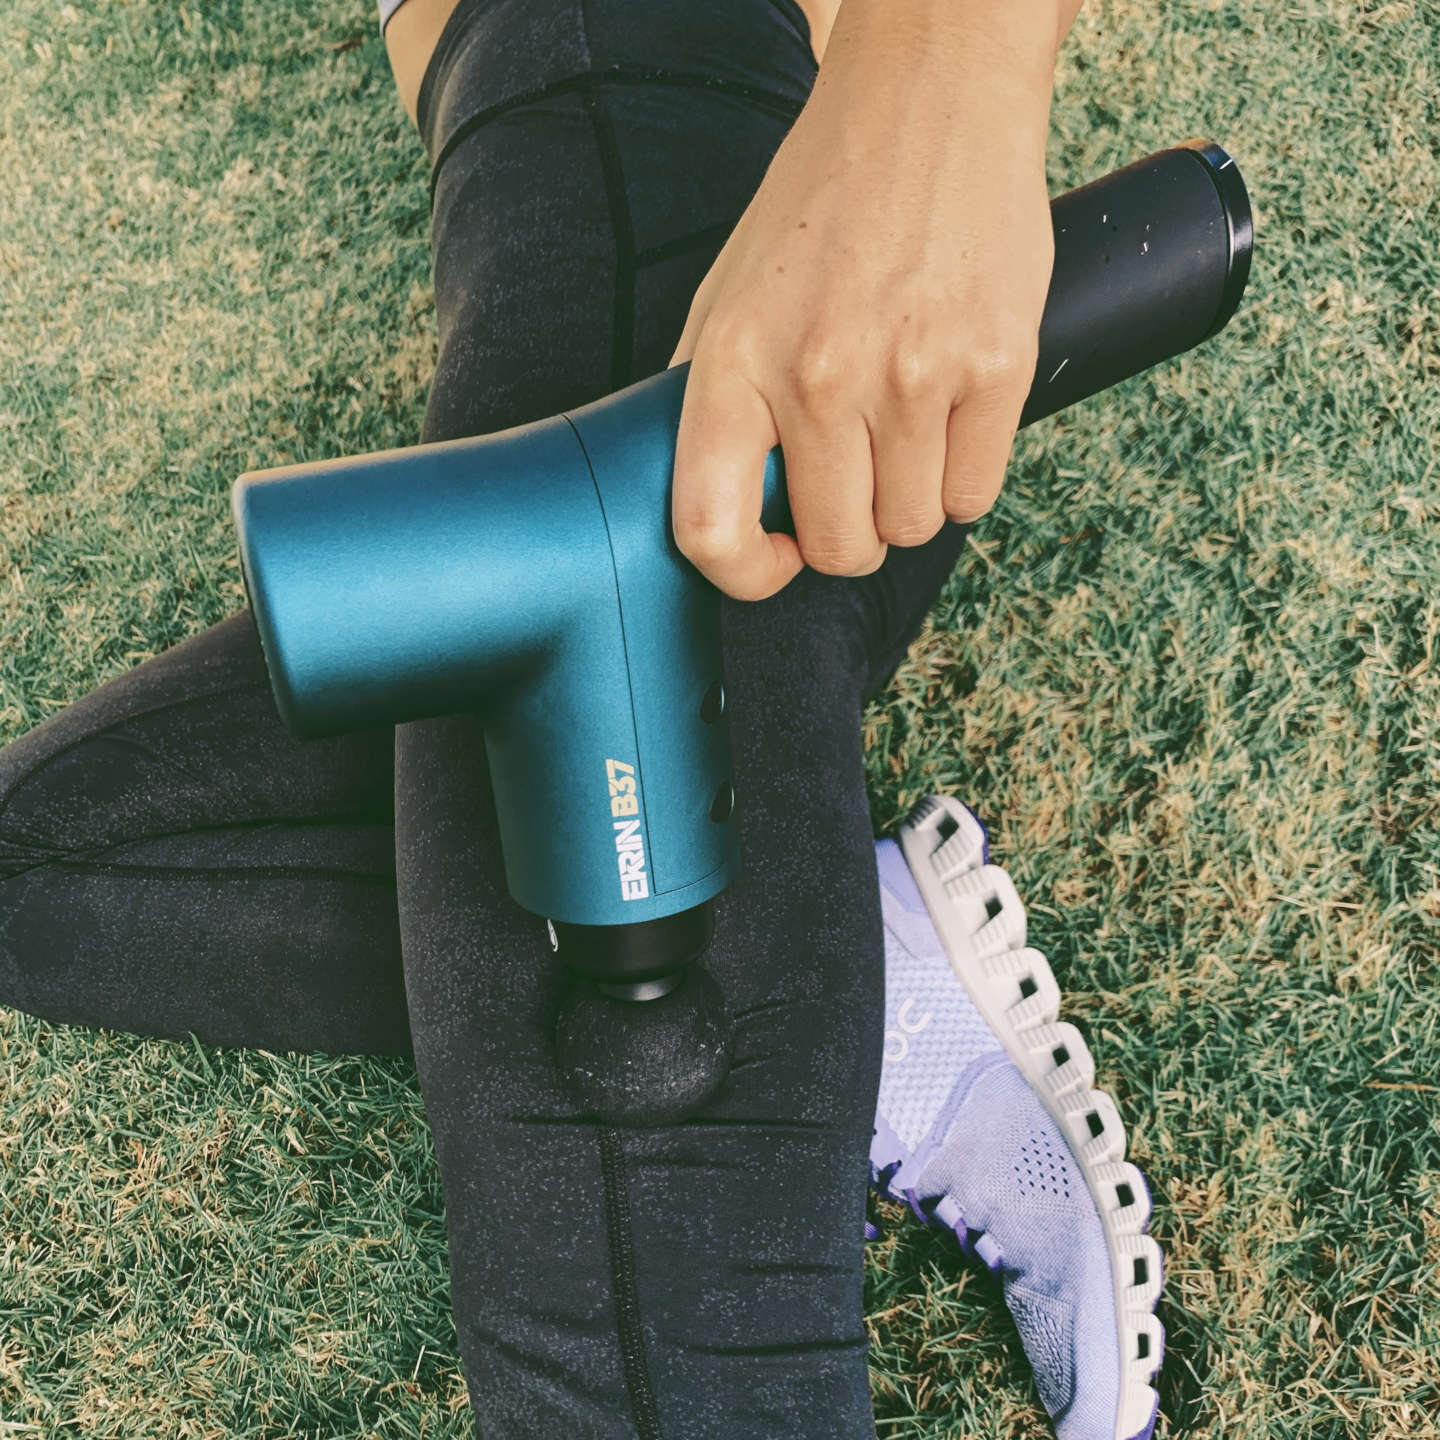 Athletic woman massaging her muscles with a massage gun outside on grass